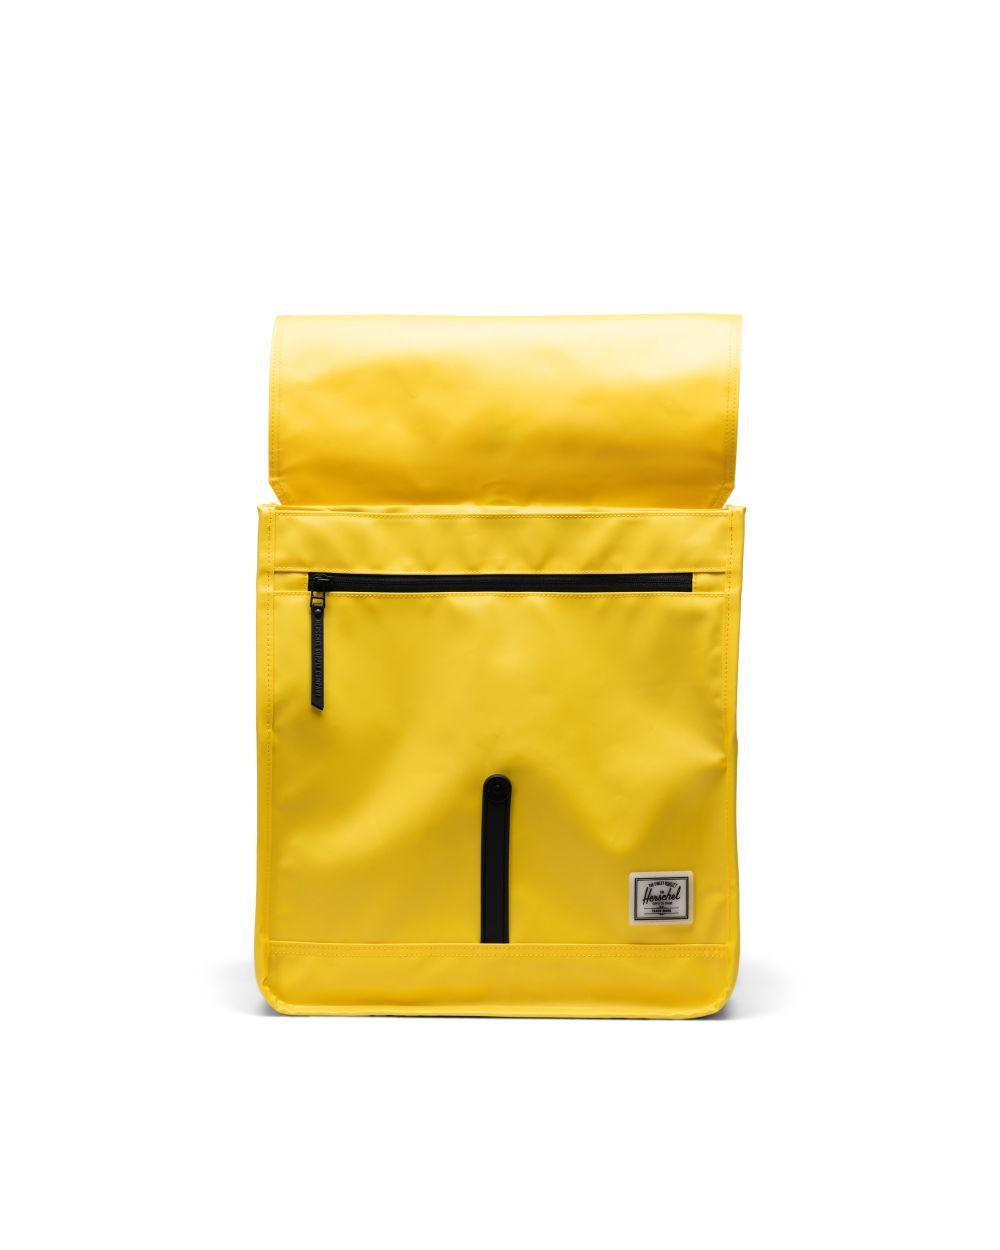 City Backpack Mid-Volume Cyber Yellow - Weather Resistant - ECRU